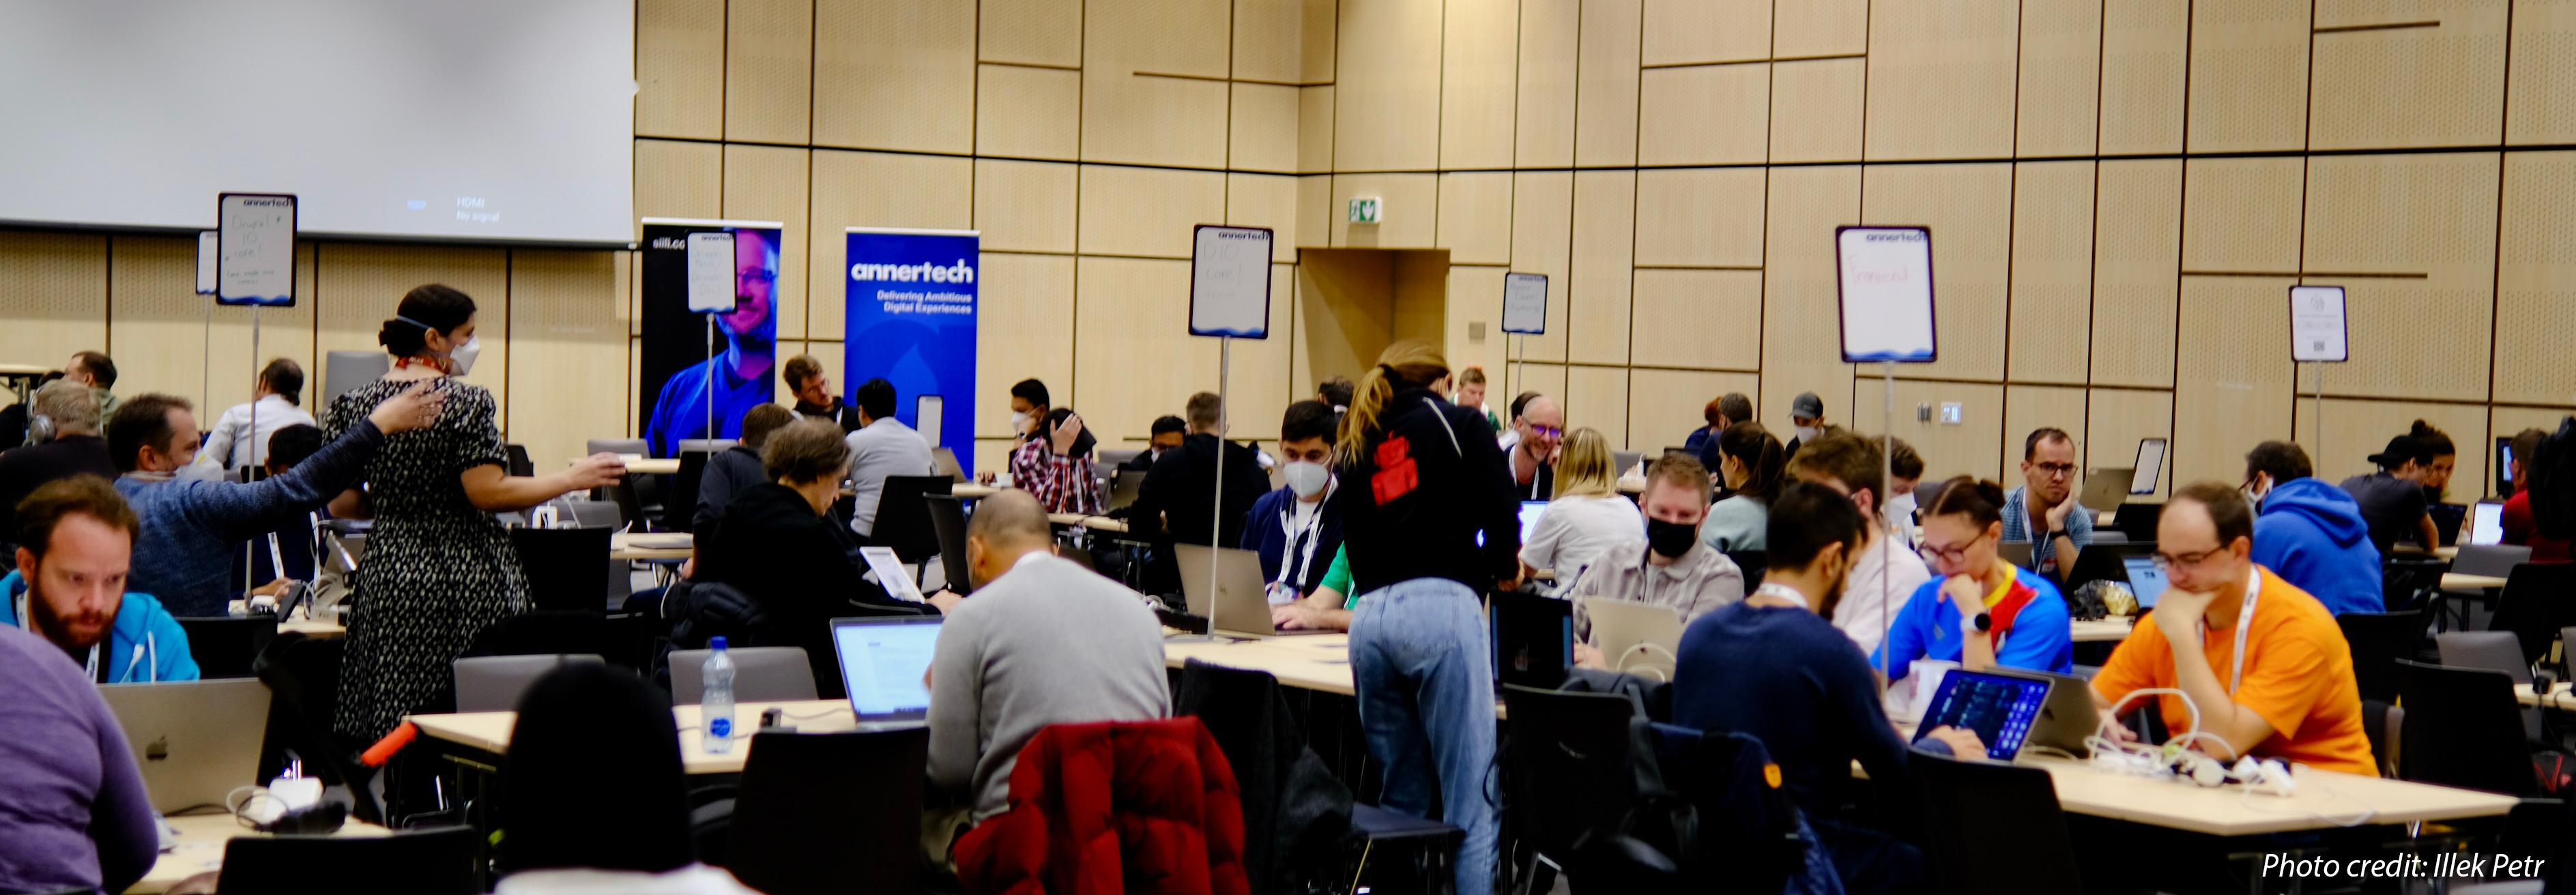 Contributors at DrupalCon Prague stand or sit with laptops and talk